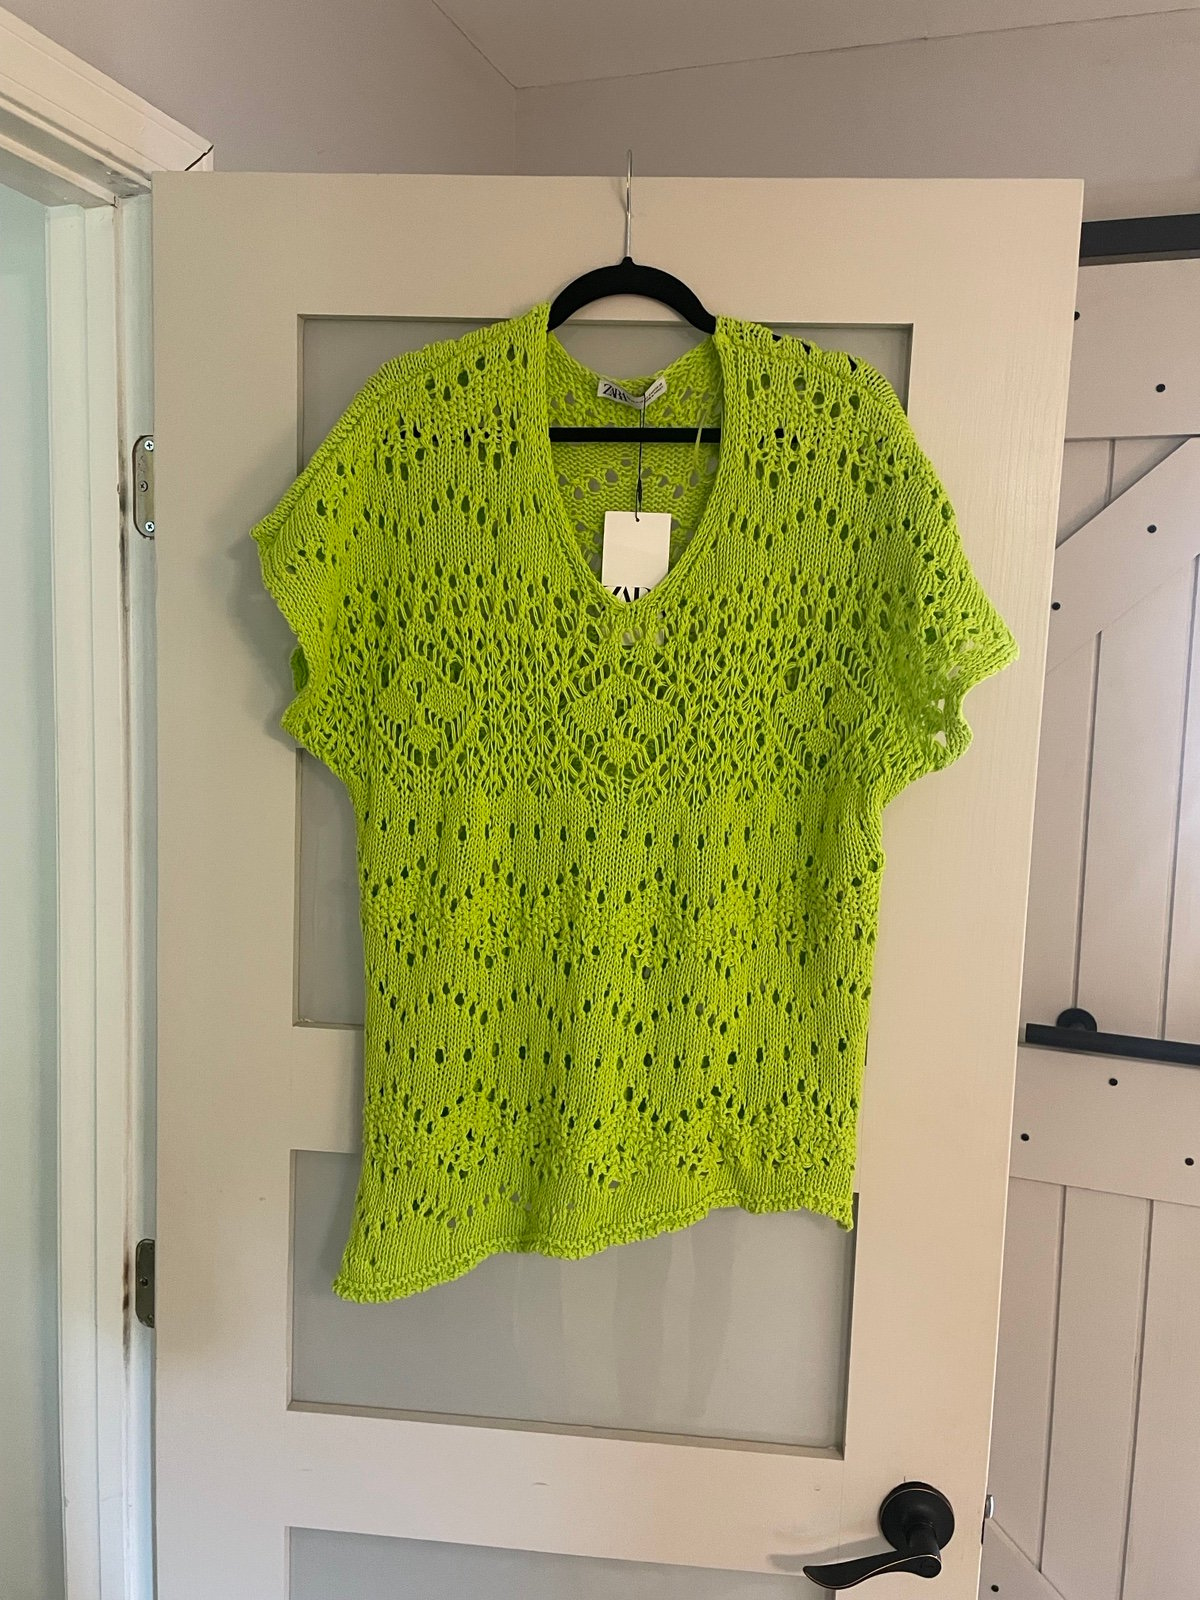 Exclusive Zara Lime Green Crocheted Top NWT Xs Small hB